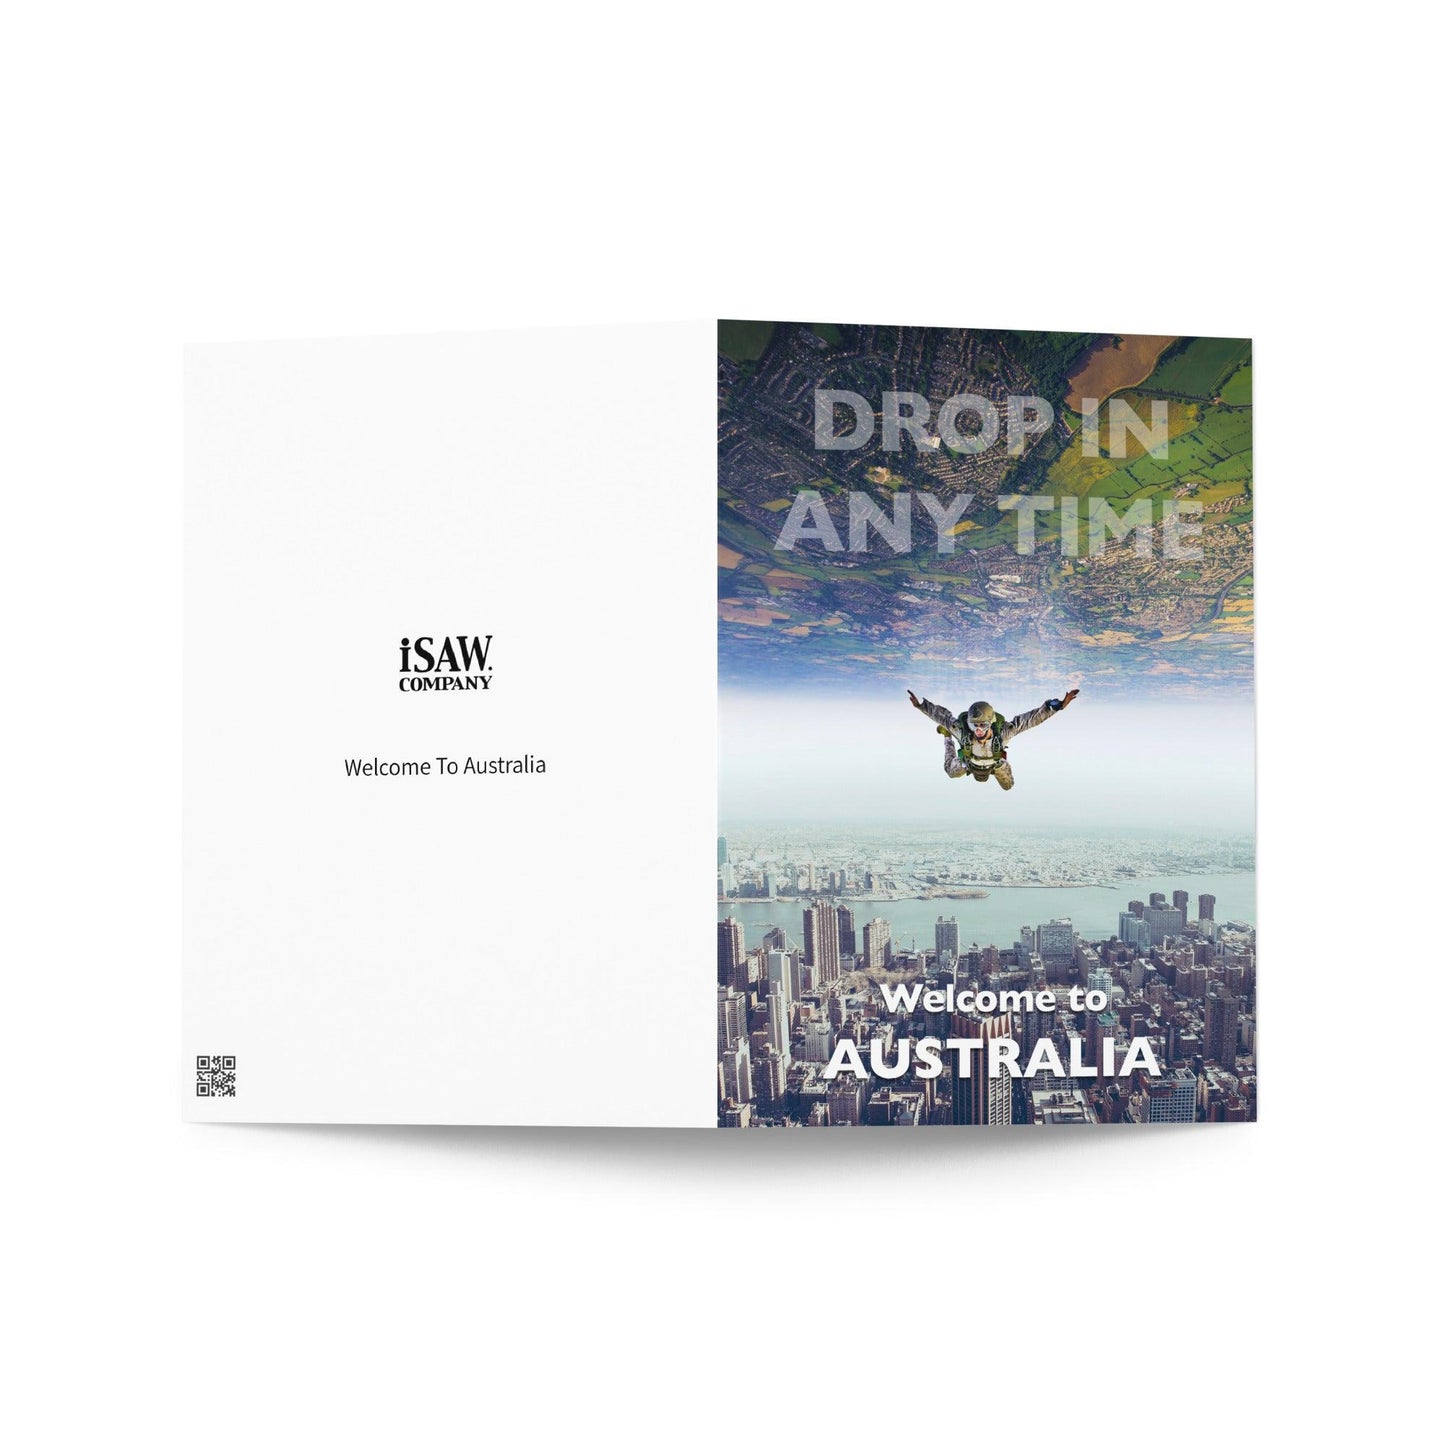 Welcome To Australia - Note Card - iSAW Company